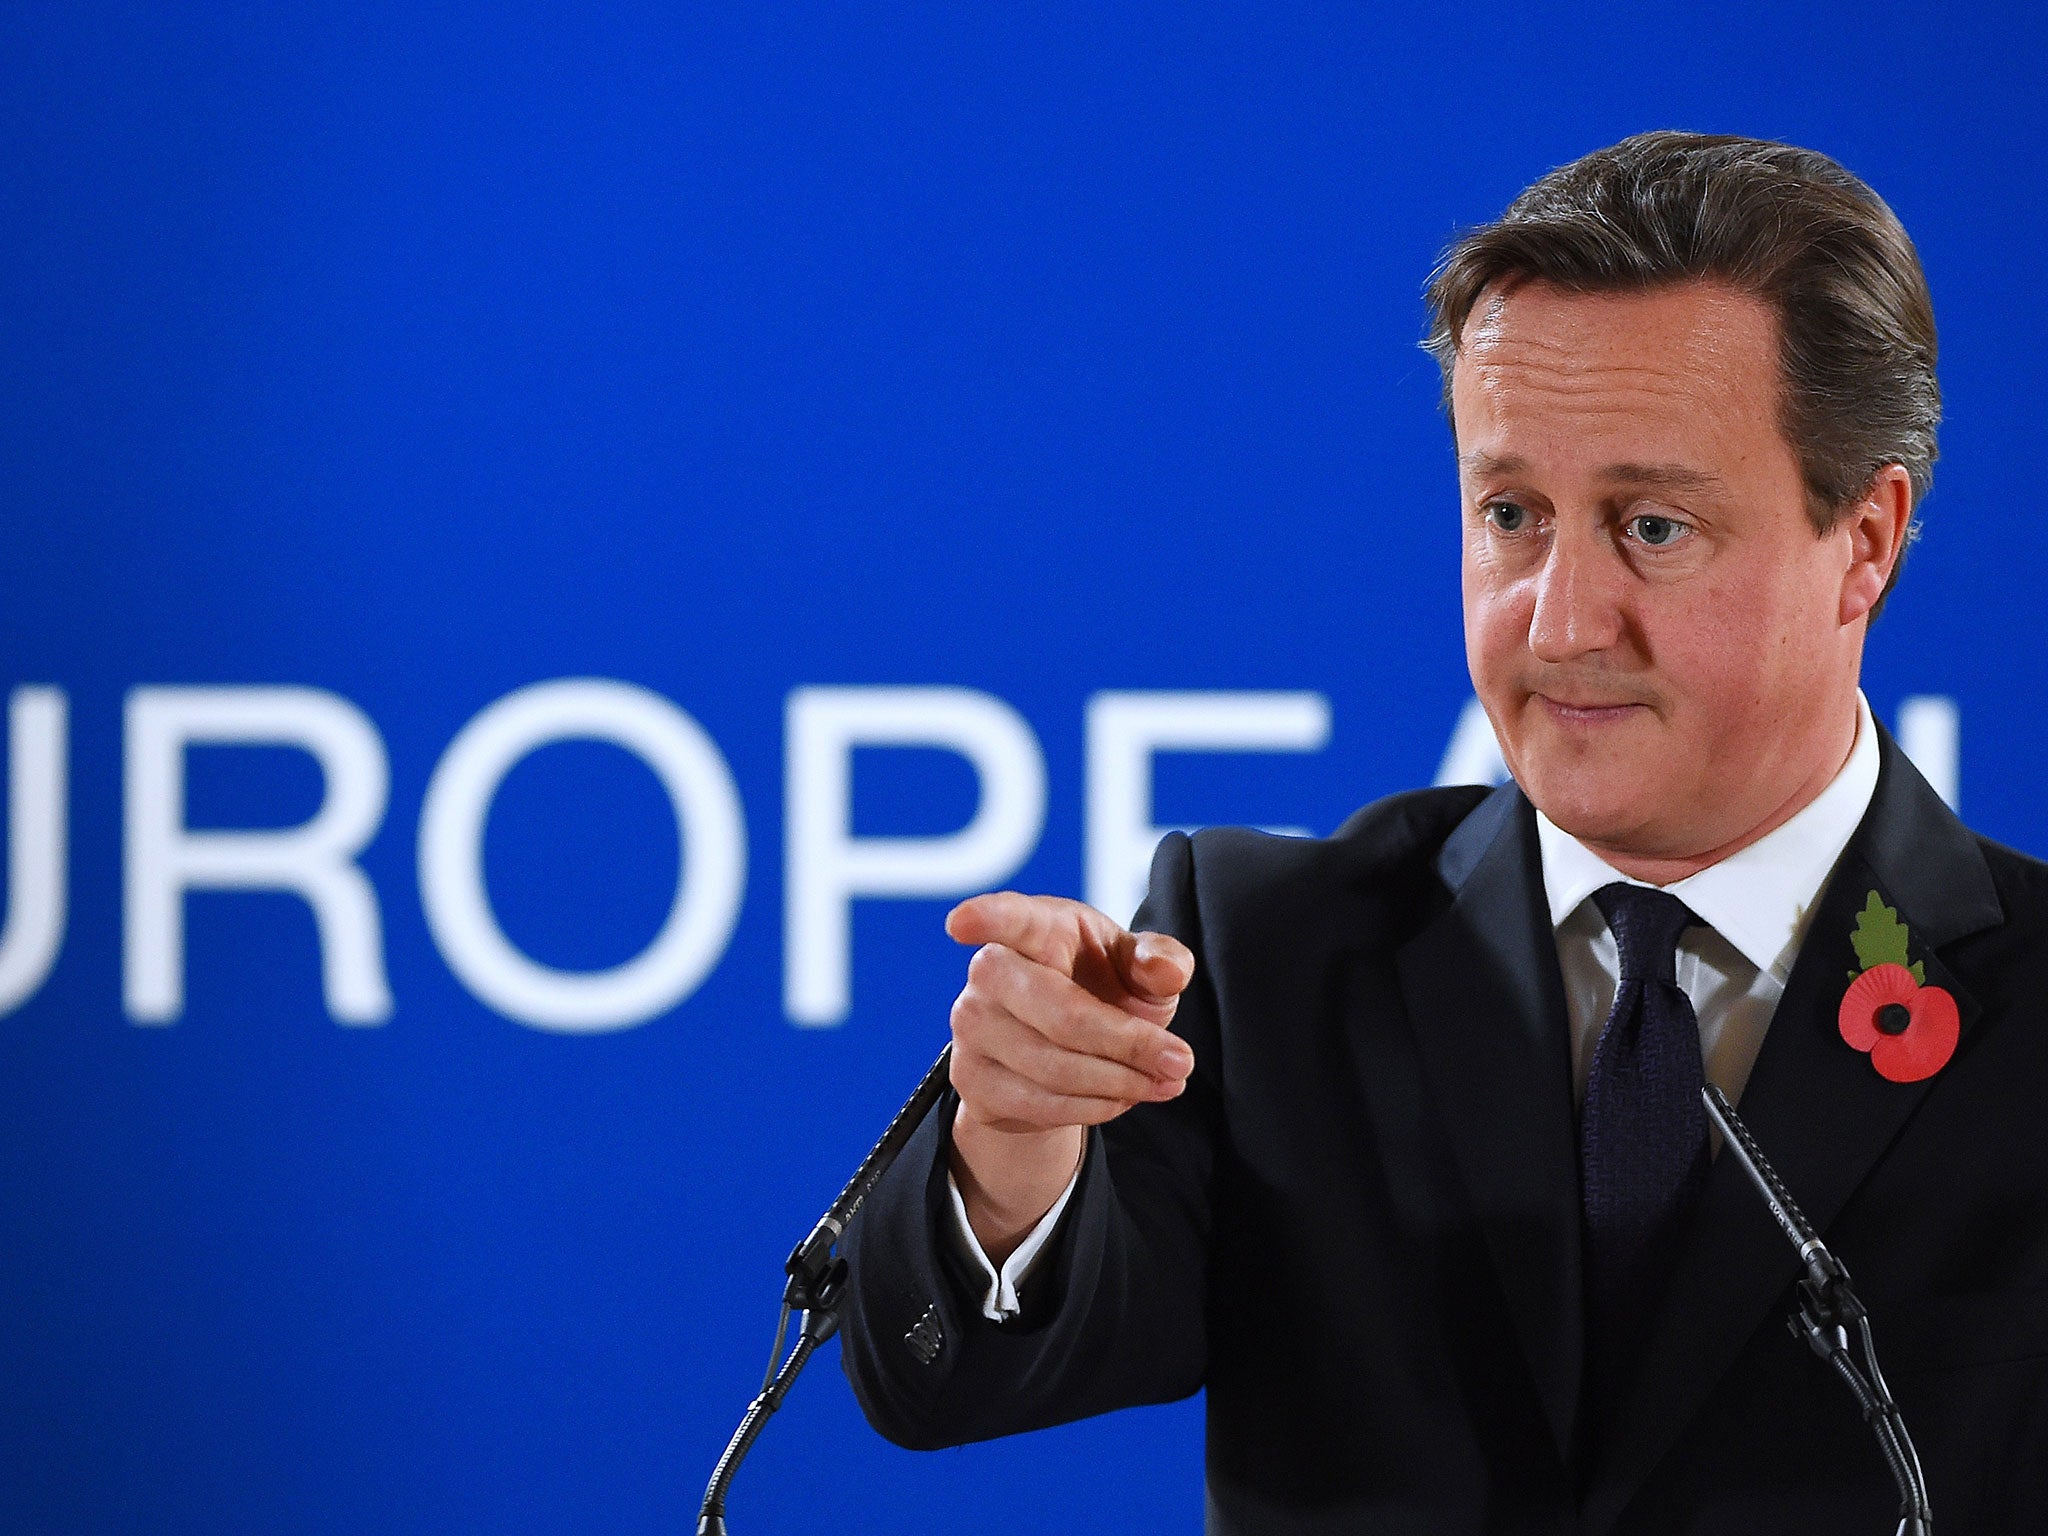 David Cameron during a press conference at the end of a European Union Summit